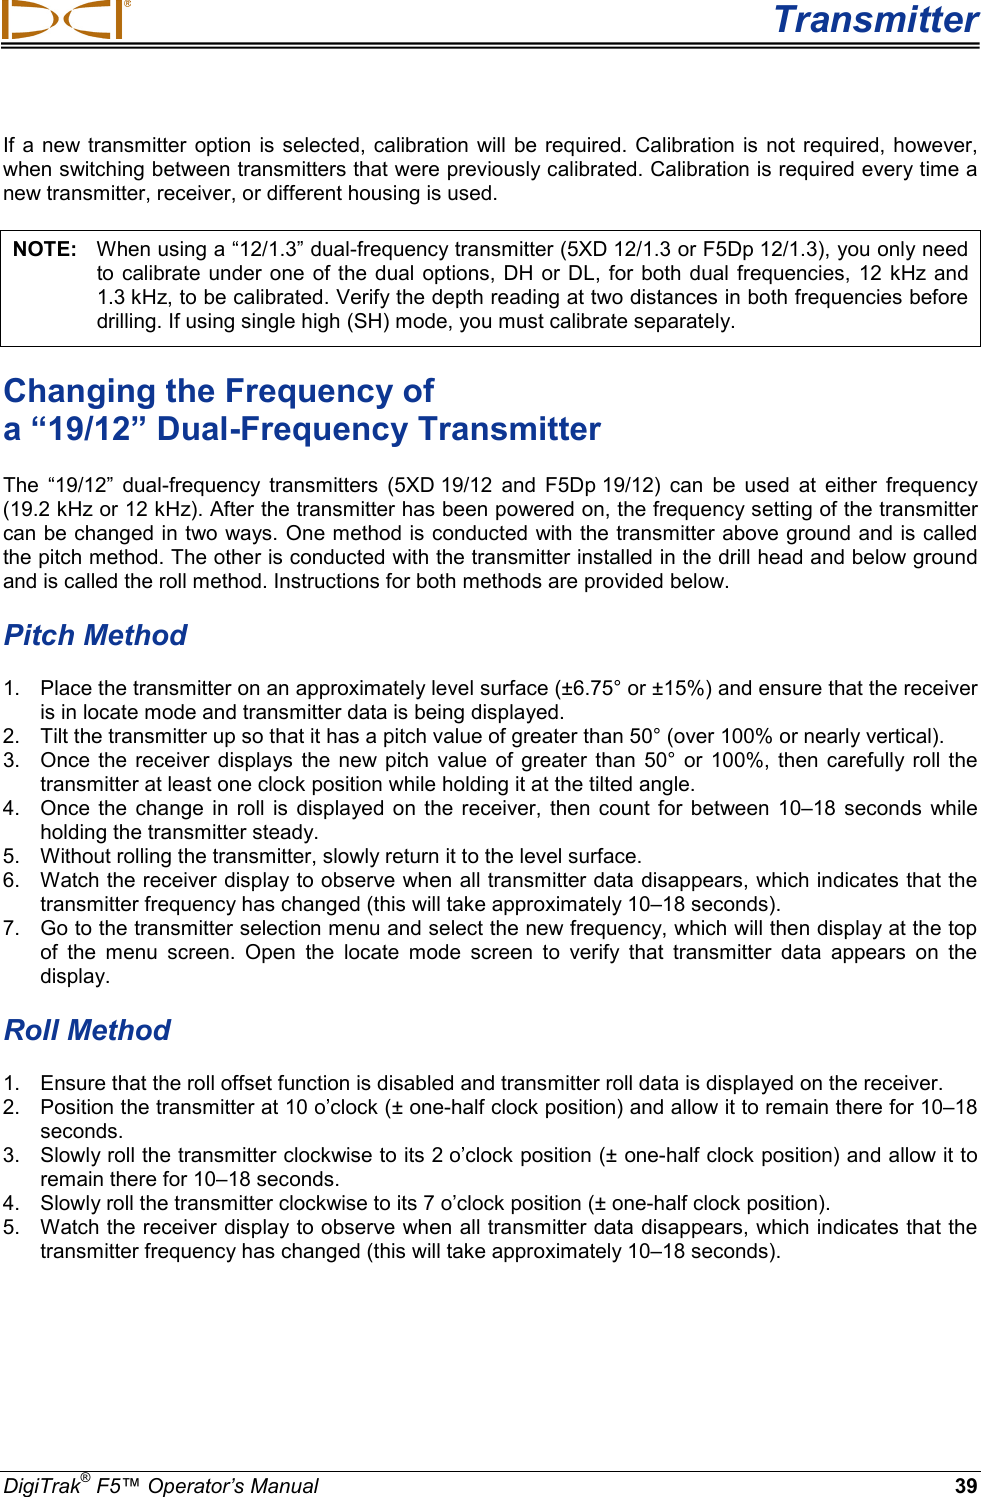  Transmitter DigiTrak® F5™ Operator’s Manual 39 If a new transmitter option is selected, calibration will be required. Calibration is not required, however, when switching between transmitters that were previously calibrated. Calibration is required every time a new transmitter, receiver, or different housing is used.  NOTE:   When using a “12/1.3” dual-frequency transmitter (5XD 12/1.3 or F5Dp 12/1.3), you only need to calibrate under one of the dual options, DH or DL, for both dual frequencies, 12 kHz and 1.3 kHz, to be calibrated. Verify the depth reading at two distances in both frequencies before drilling. If using single high (SH) mode, you must calibrate separately. Changing the Frequency of  a “19/12” Dual-Frequency Transmitter The “19/12” dual-frequency transmitters  (5XD 19/12  and F5Dp 19/12)  can be used at either frequency (19.2 kHz or 12 kHz). After the transmitter has been powered on, the frequency setting of the transmitter can be changed in two ways. One method is conducted with the transmitter above ground and is called the pitch method. The other is conducted with the transmitter installed in the drill head and below ground and is called the roll method. Instructions for both methods are provided below. Pitch Method  1. Place the transmitter on an approximately level surface (±6.75° or ±15%) and ensure that the receiver is in locate mode and transmitter data is being displayed.  2. Tilt the transmitter up so that it has a pitch value of greater than 50° (over 100% or nearly vertical).  3. Once the receiver displays the new pitch value of greater than 50° or 100%, then carefully roll the transmitter at least one clock position while holding it at the tilted angle. 4. Once the change in roll is displayed on the receiver, then count for between  10–18 seconds while holding the transmitter steady. 5. Without rolling the transmitter, slowly return it to the level surface.  6. Watch the receiver display to observe when all transmitter data disappears, which indicates that the transmitter frequency has changed (this will take approximately 10–18 seconds).   7. Go to the transmitter selection menu and select the new frequency, which will then display at the top of  the menu screen. Open the locate mode screen to verify that transmitter data appears on the display. Roll Method  1. Ensure that the roll offset function is disabled and transmitter roll data is displayed on the receiver.  2. Position the transmitter at 10 o’clock (± one-half clock position) and allow it to remain there for 10–18 seconds.  3. Slowly roll the transmitter clockwise to its 2 o’clock position (± one-half clock position) and allow it to remain there for 10–18 seconds.  4. Slowly roll the transmitter clockwise to its 7 o’clock position (± one-half clock position).  5. Watch the receiver display to observe when all transmitter data disappears, which indicates that the transmitter frequency has changed (this will take approximately 10–18 seconds).  